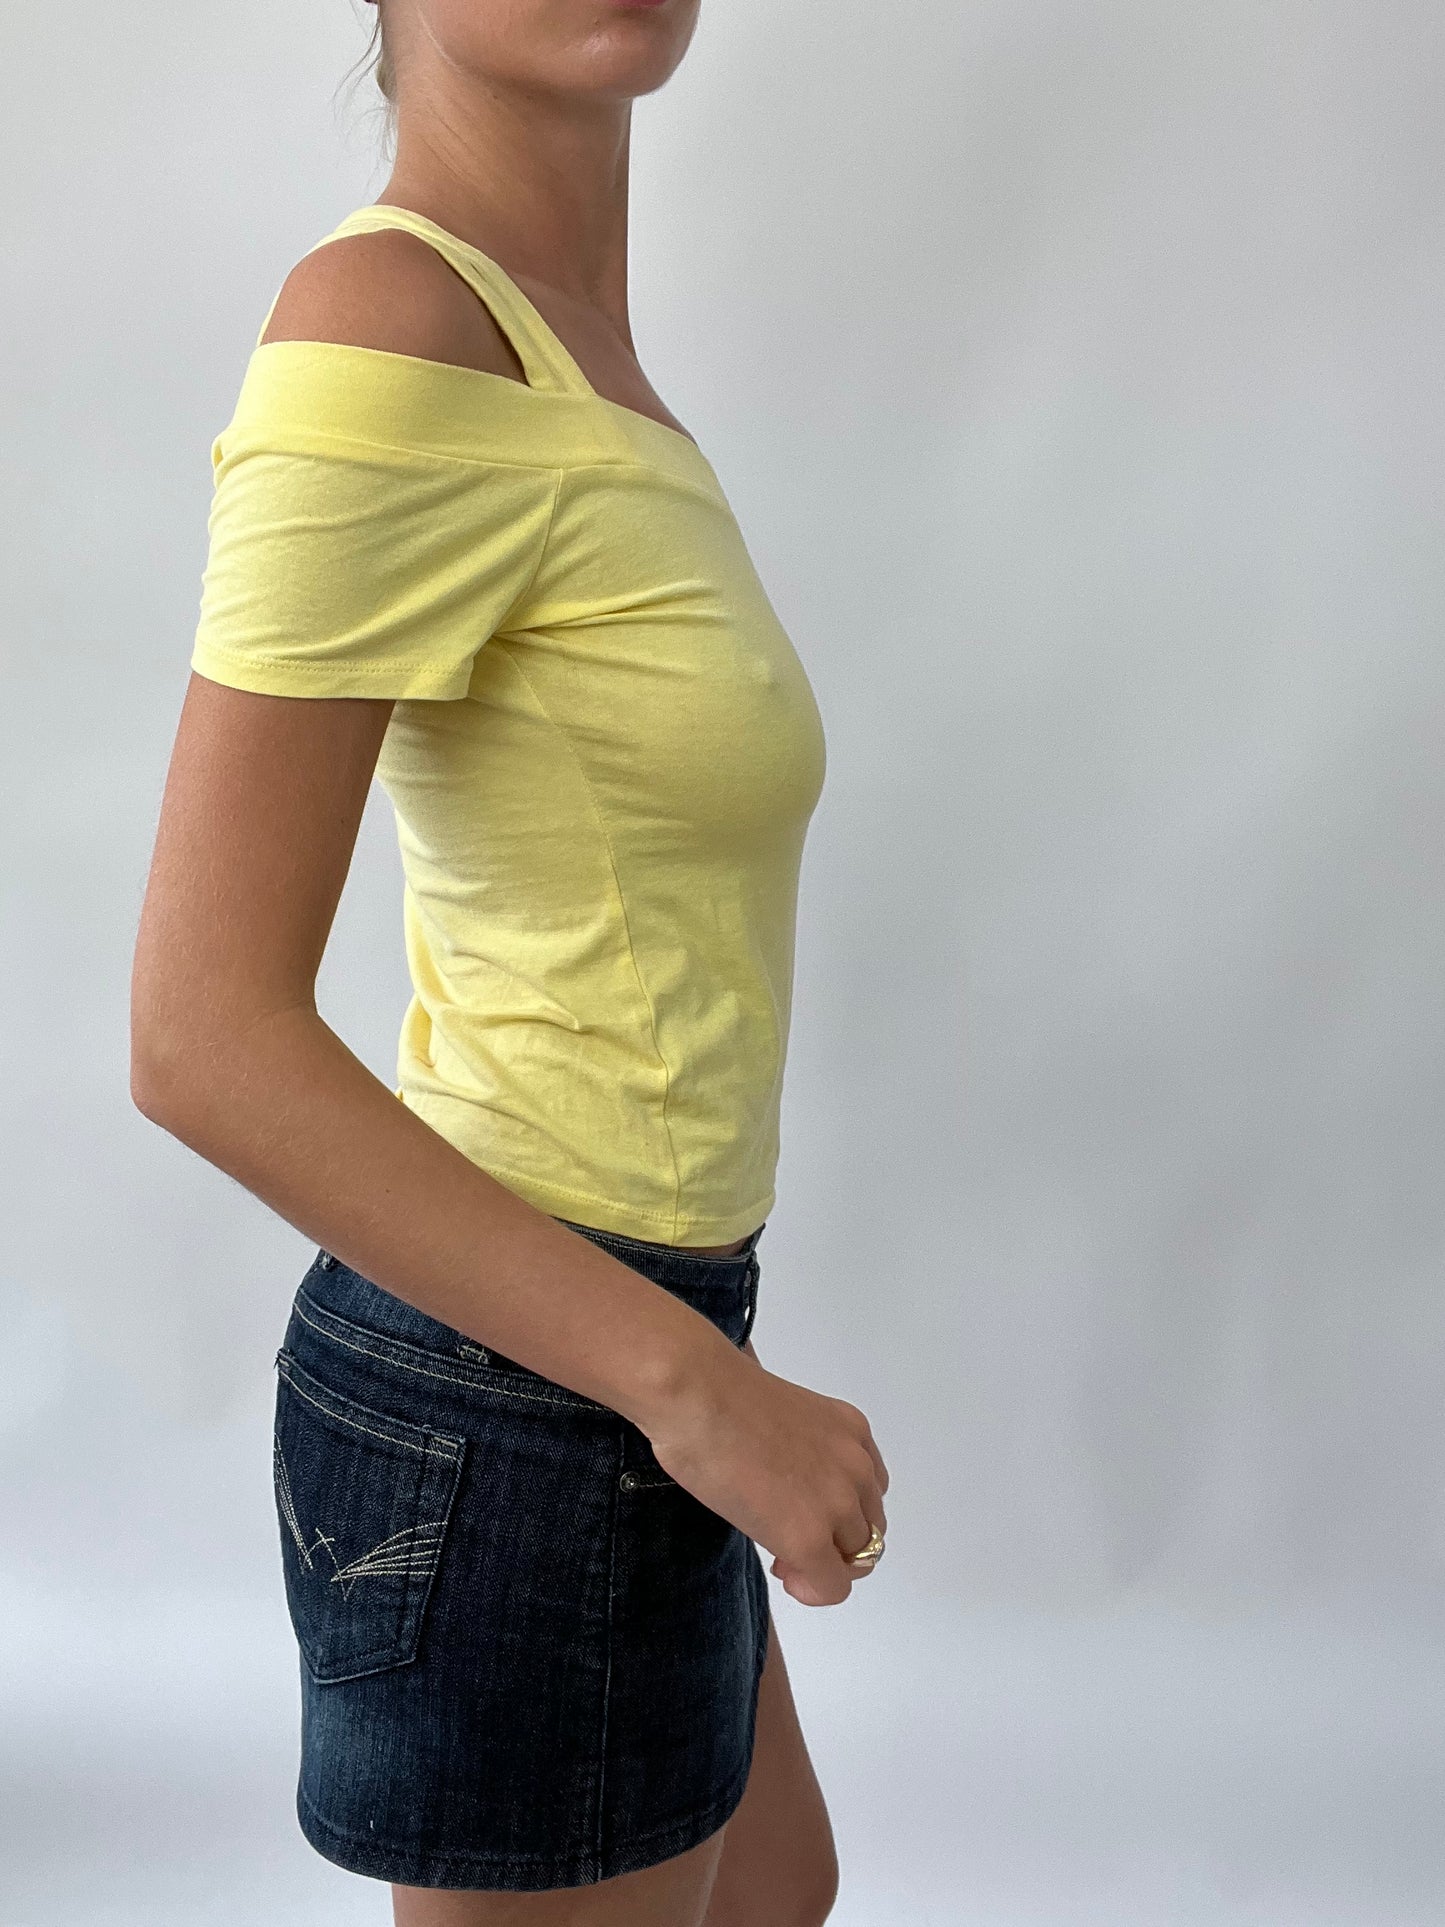 PUB GARDEN DROP | small yellow off the shoulder top with crossed straps